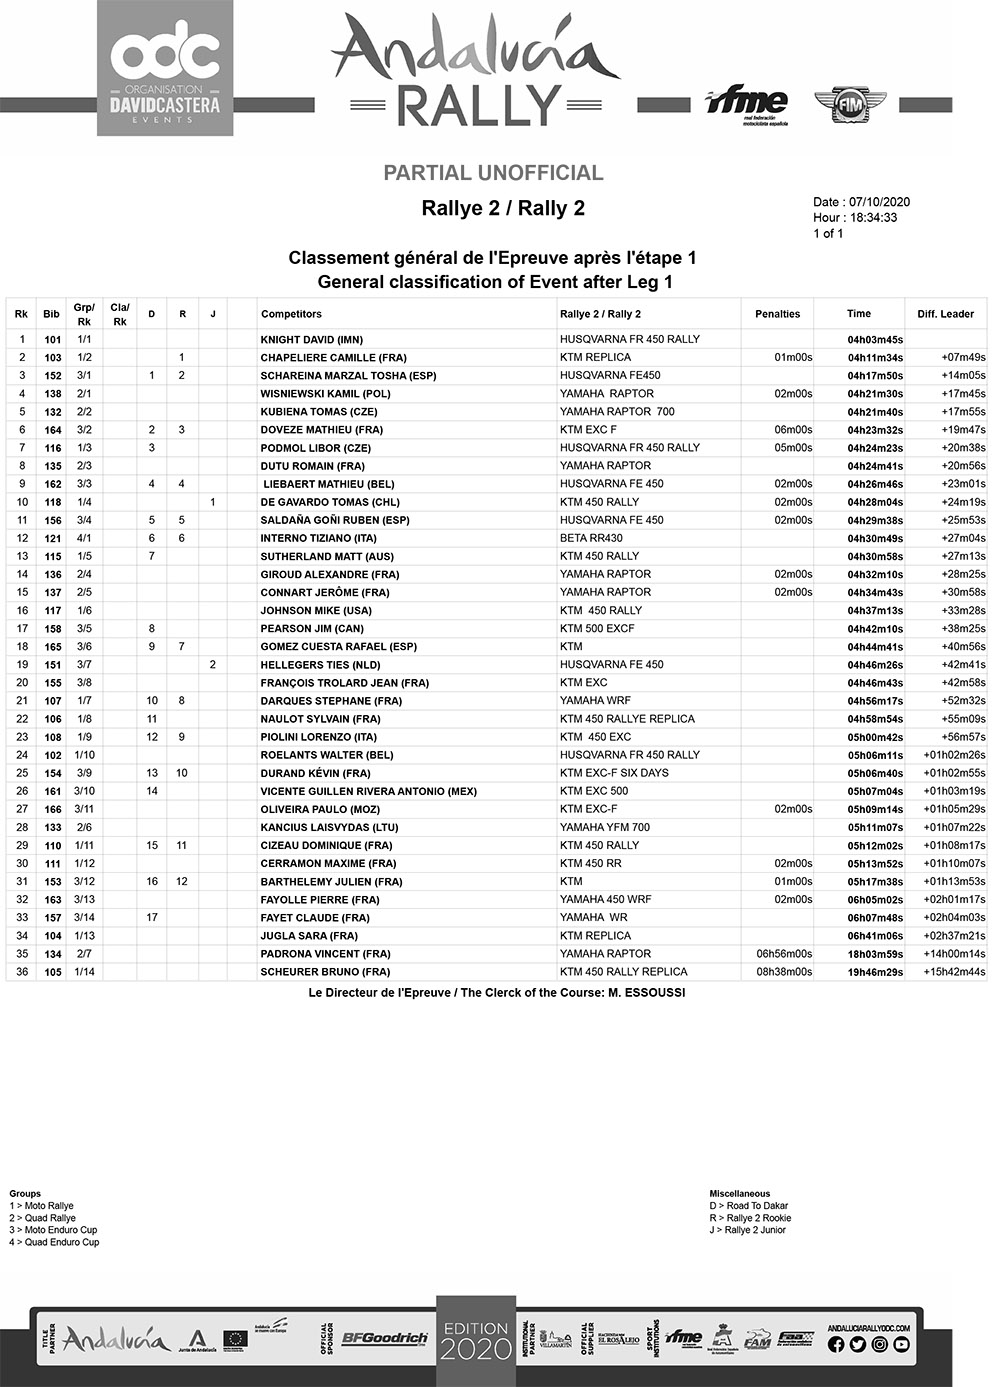 unofficial-classification-leg-1-rally2